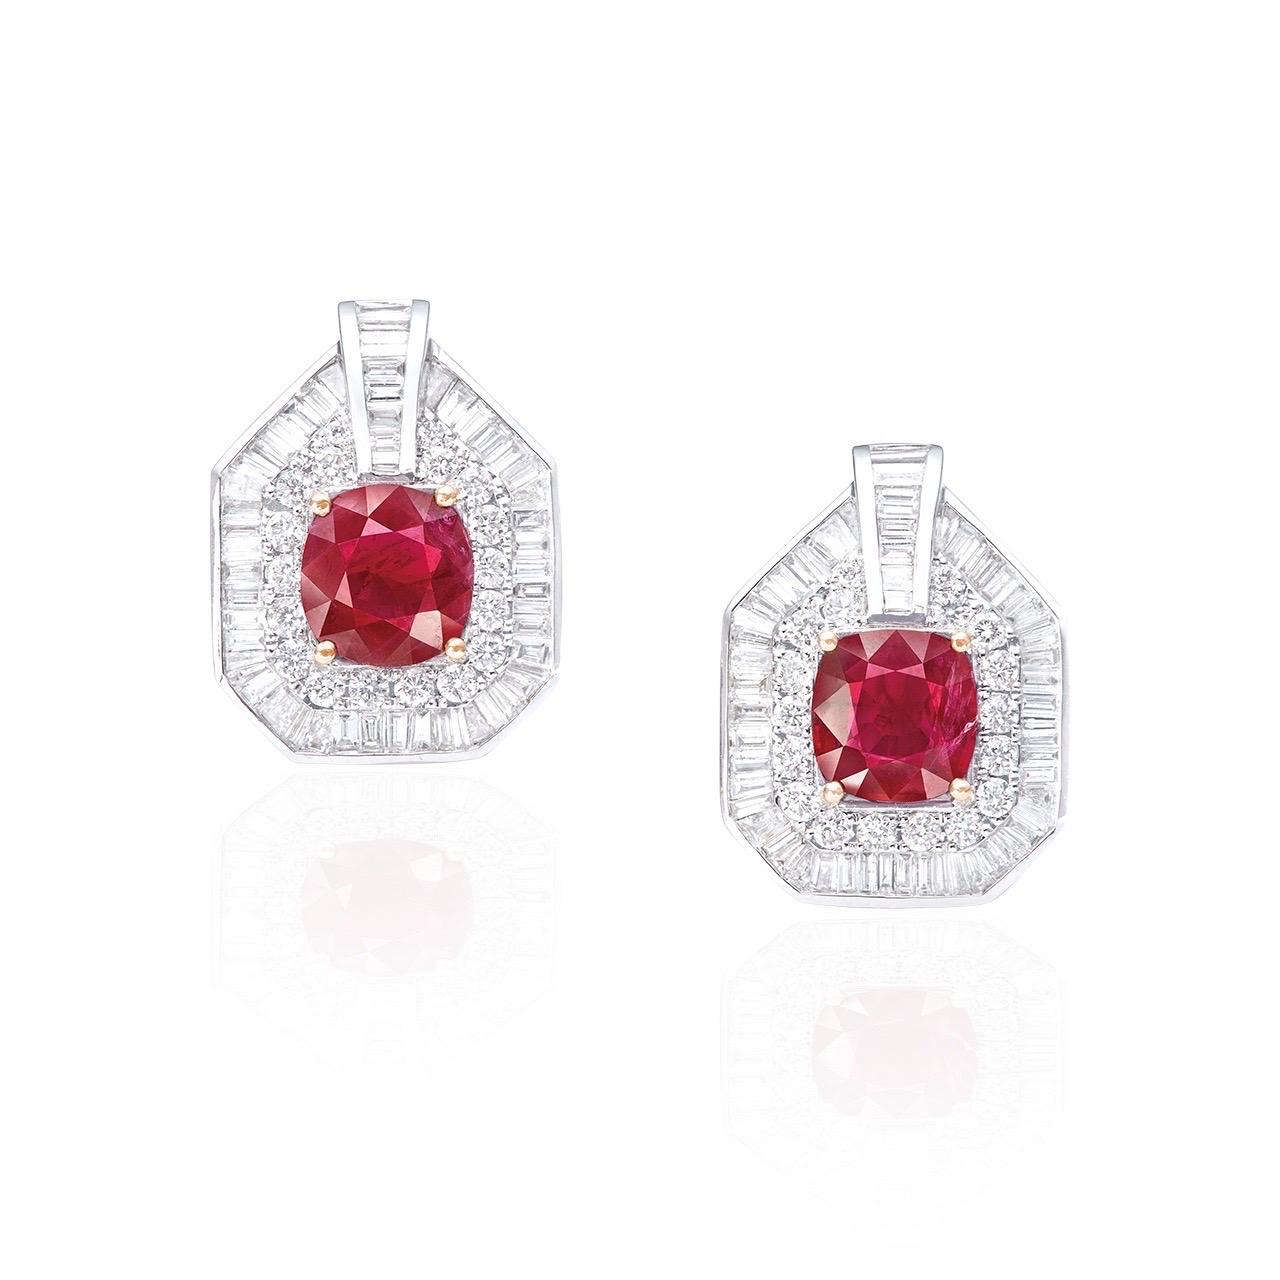 Main stone: 2.01 and 1.92 carats Vivid Red (Pigeon's Blood), Cushion
Setting: 36 round white diamonds totaling approximately 0.64 carats, trapezoid cut white diamonds totaling approximately 4.50 carats

From Emilio Jewelry, a well known and